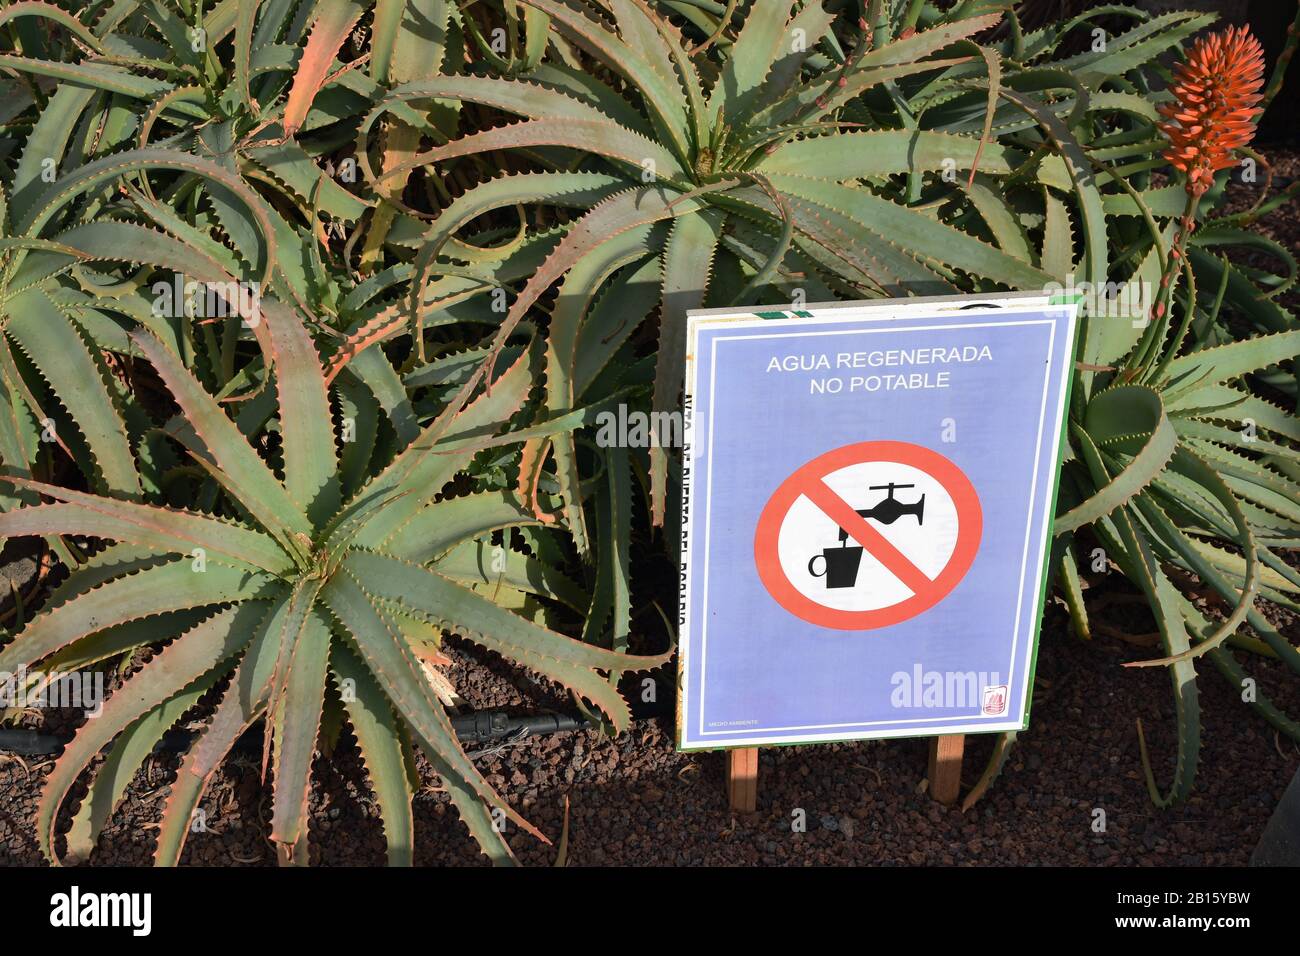 Green plants, sign (in Spanish) regenerated water (agua regenerada) and undrinkable (no potable). Waste water used for plants due to water shortages. Stock Photo